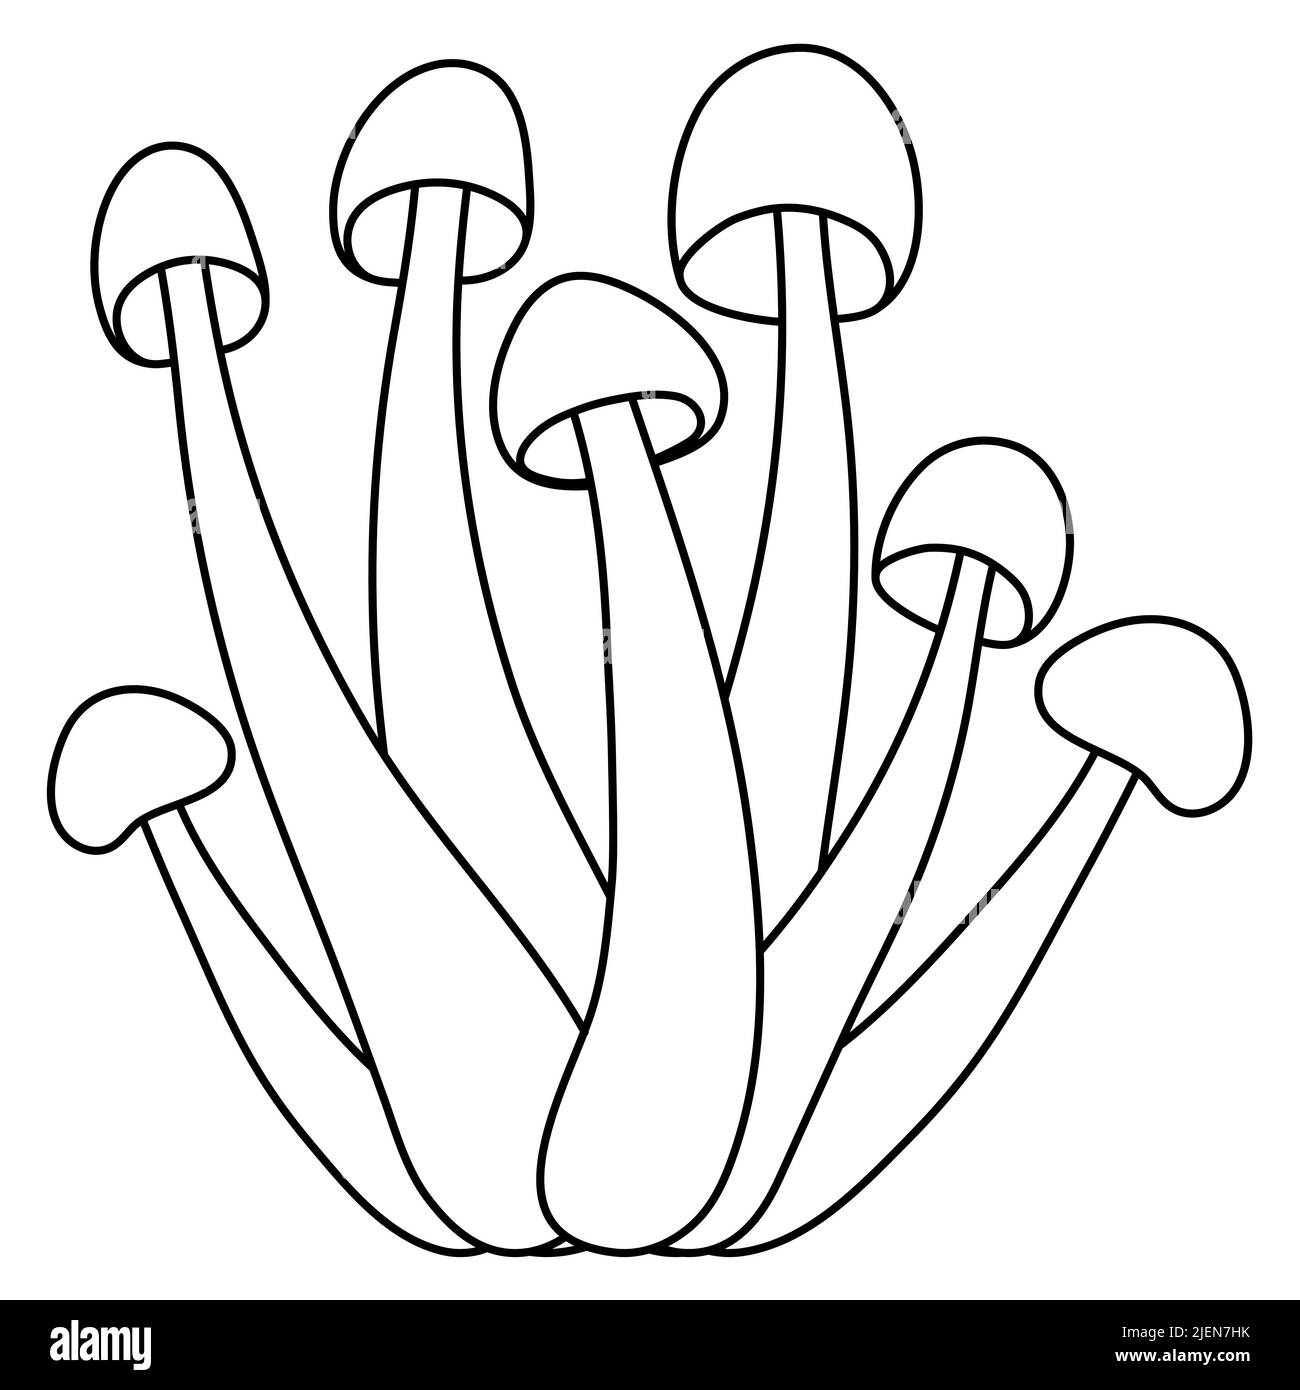 Set of mushrooms vector simple illustration isolated on white background. Outline hand drawn version. Vector mycology. Natural healthy fungus, autumn Stock Vector